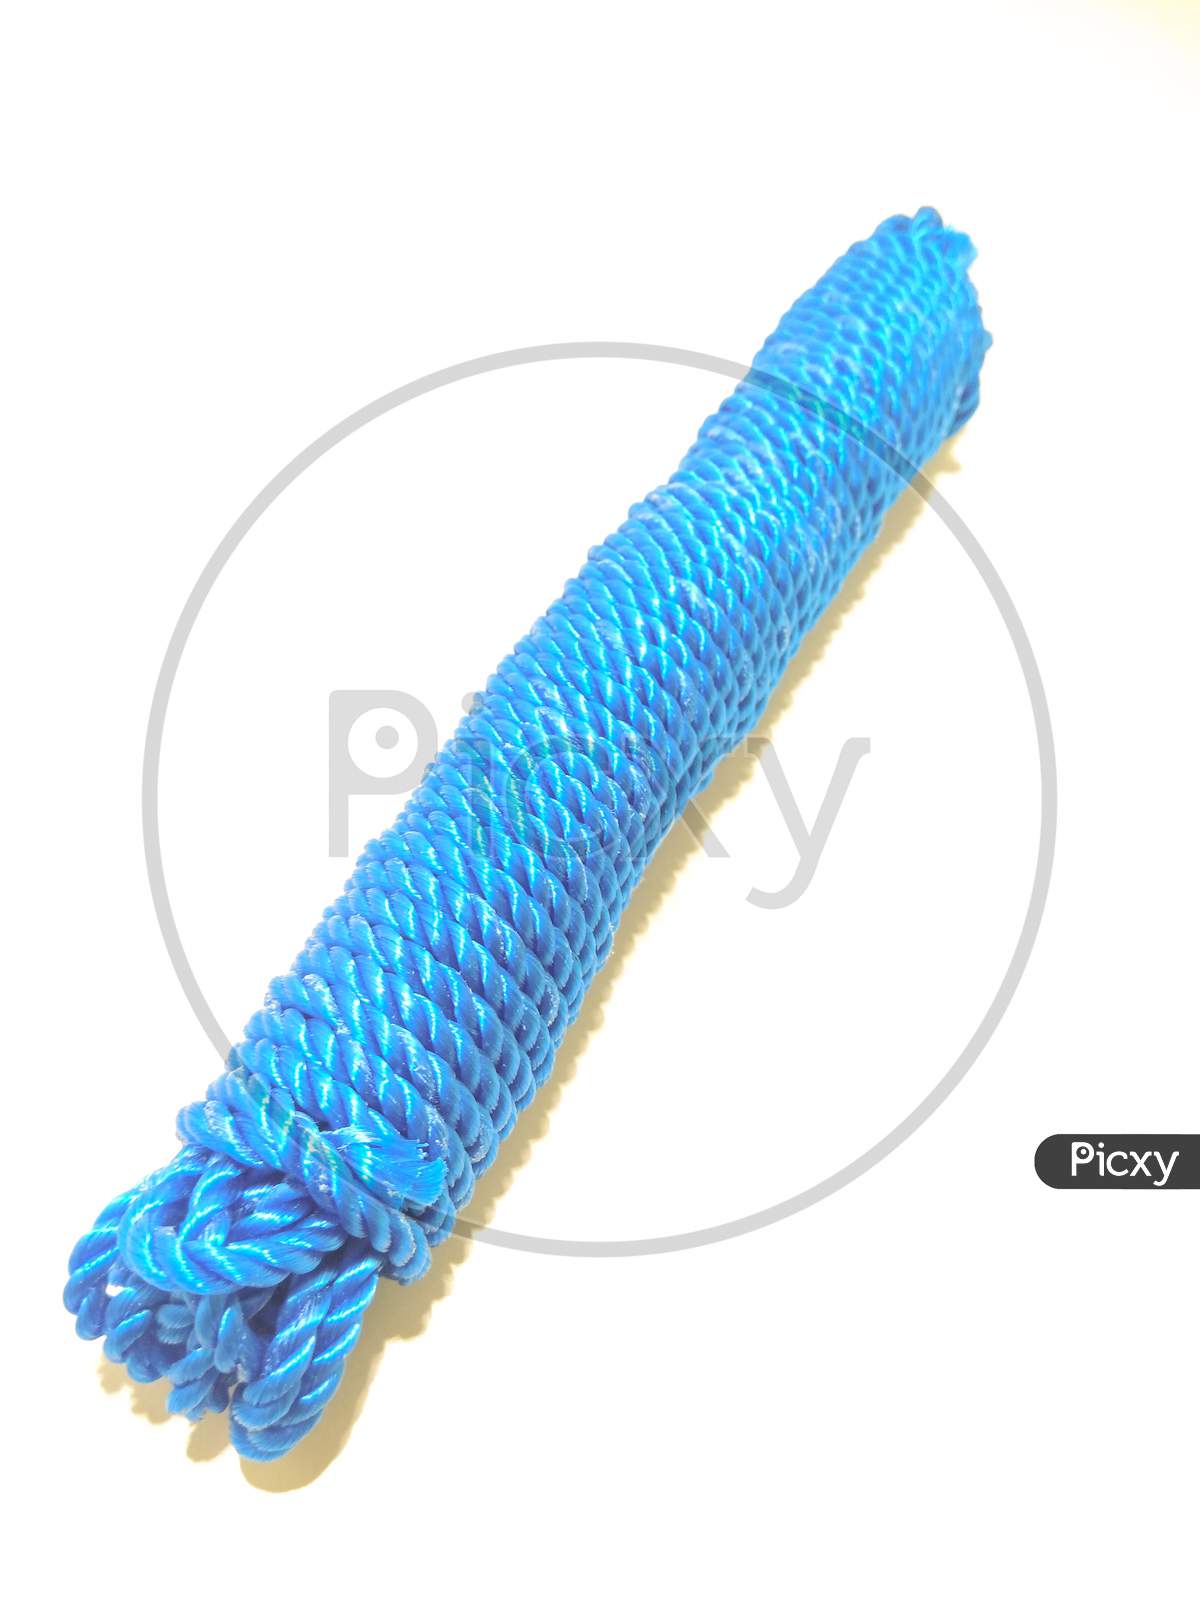 Nylon Thread Over an Isolated White Background